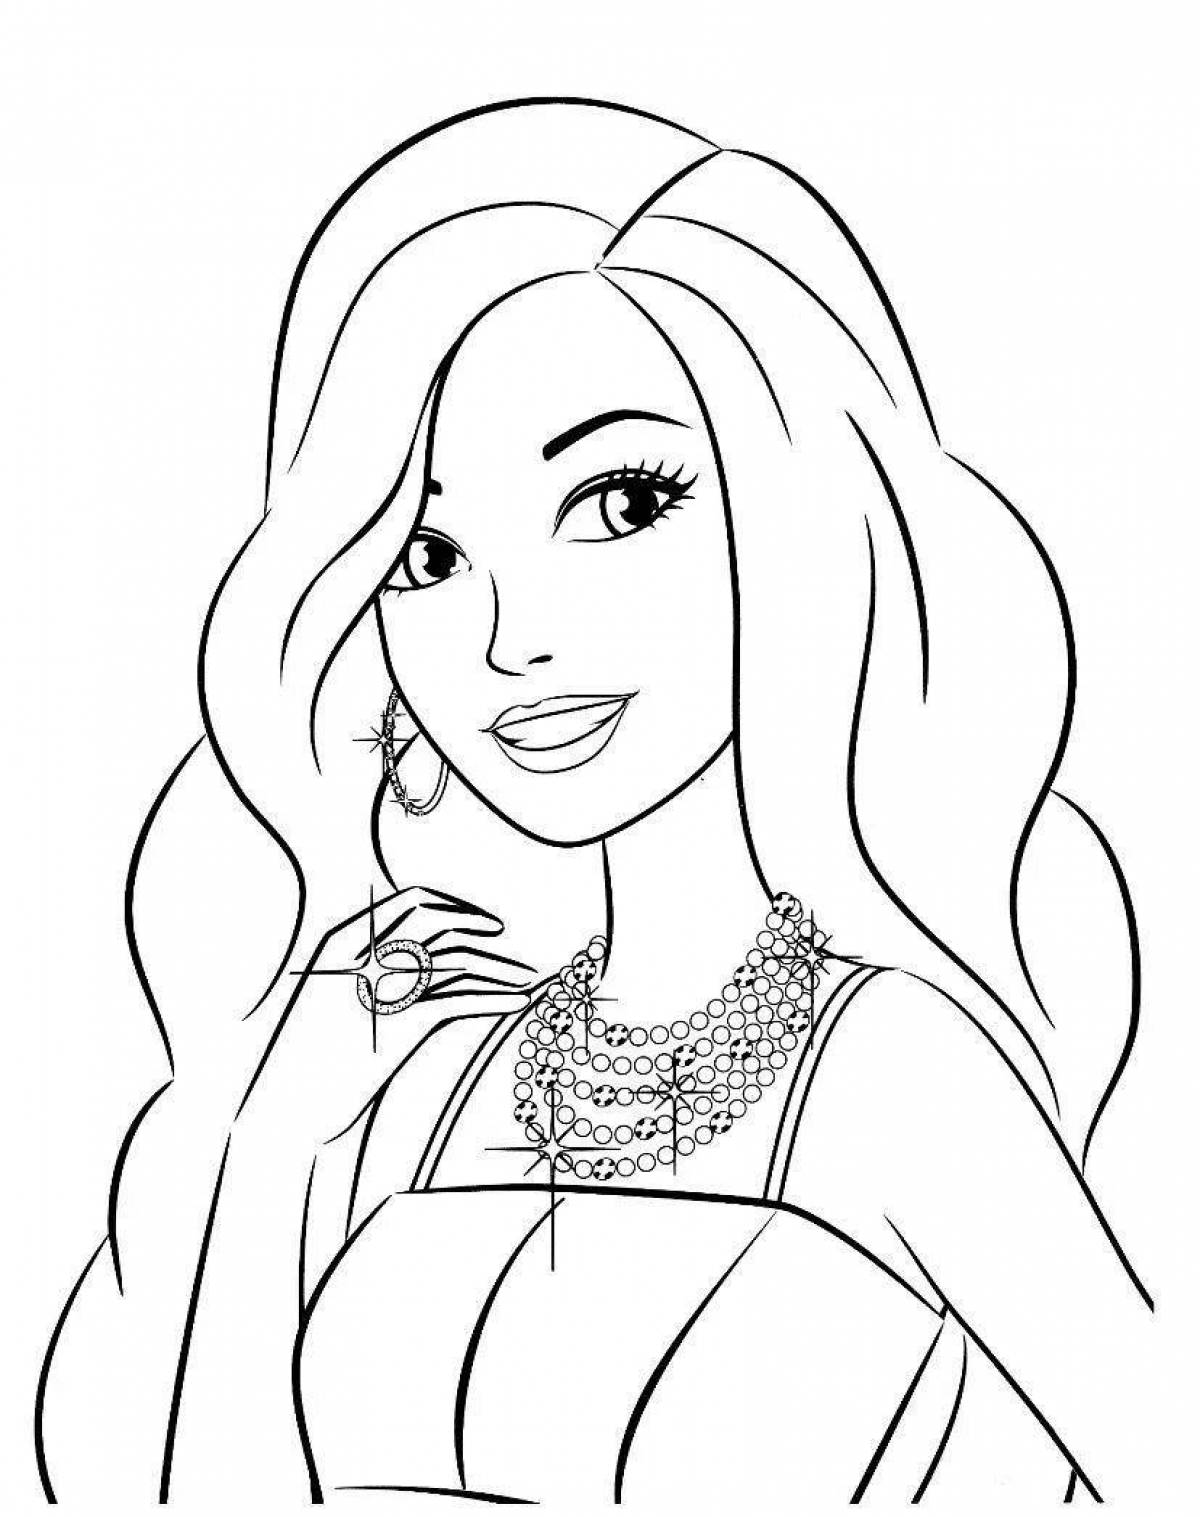 Fun coloring book for 12 year old girls